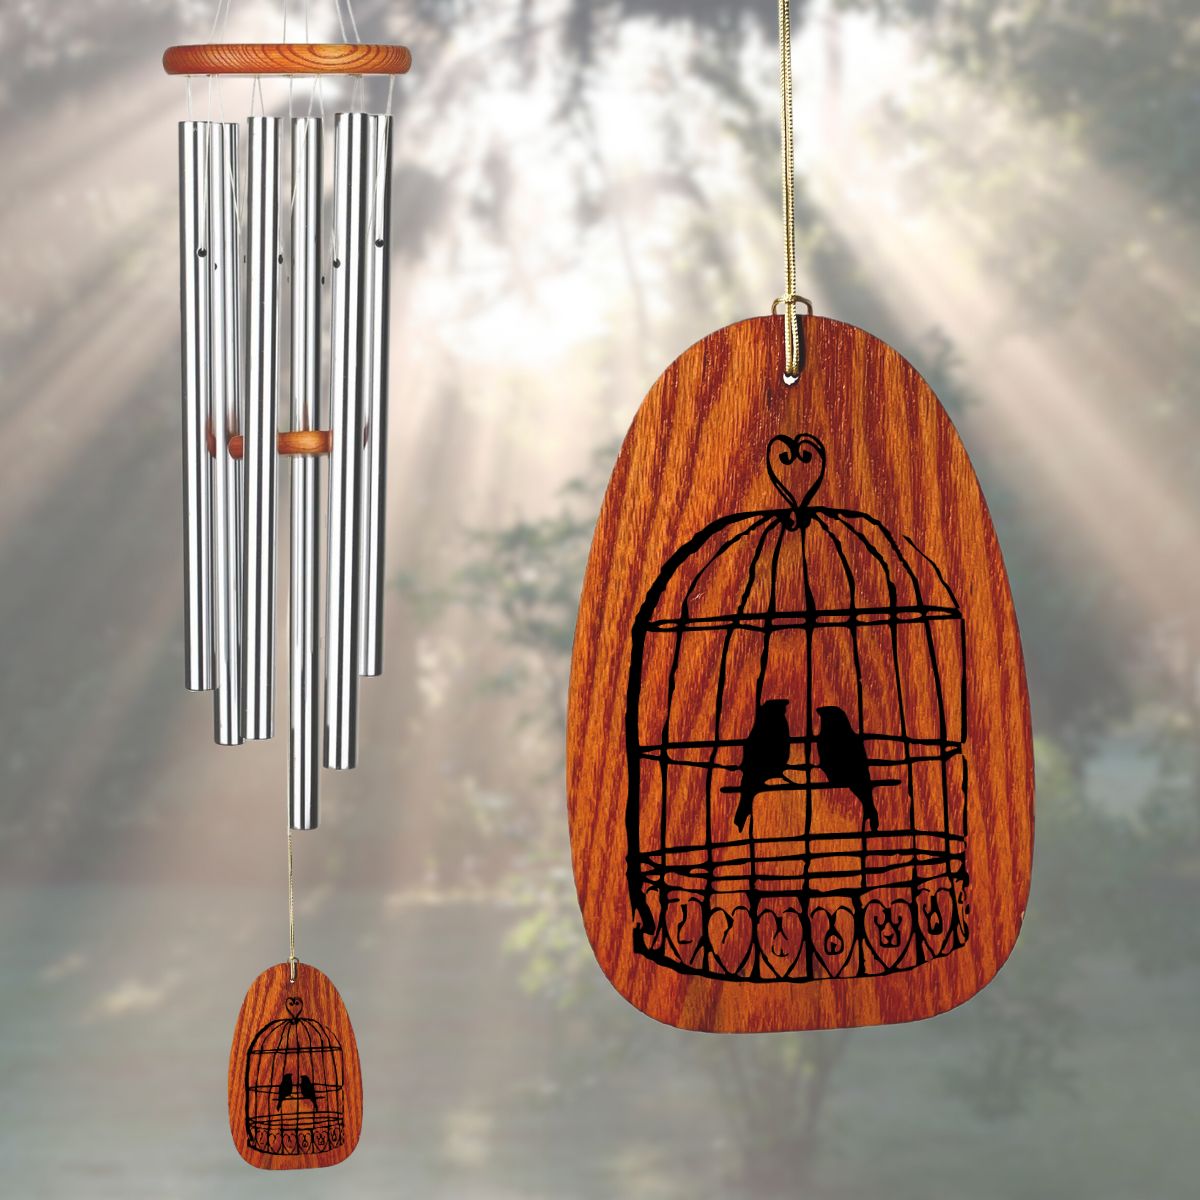 Amazing Grace Silver 40 Inch Wind Chime - Engravable Bird Cage